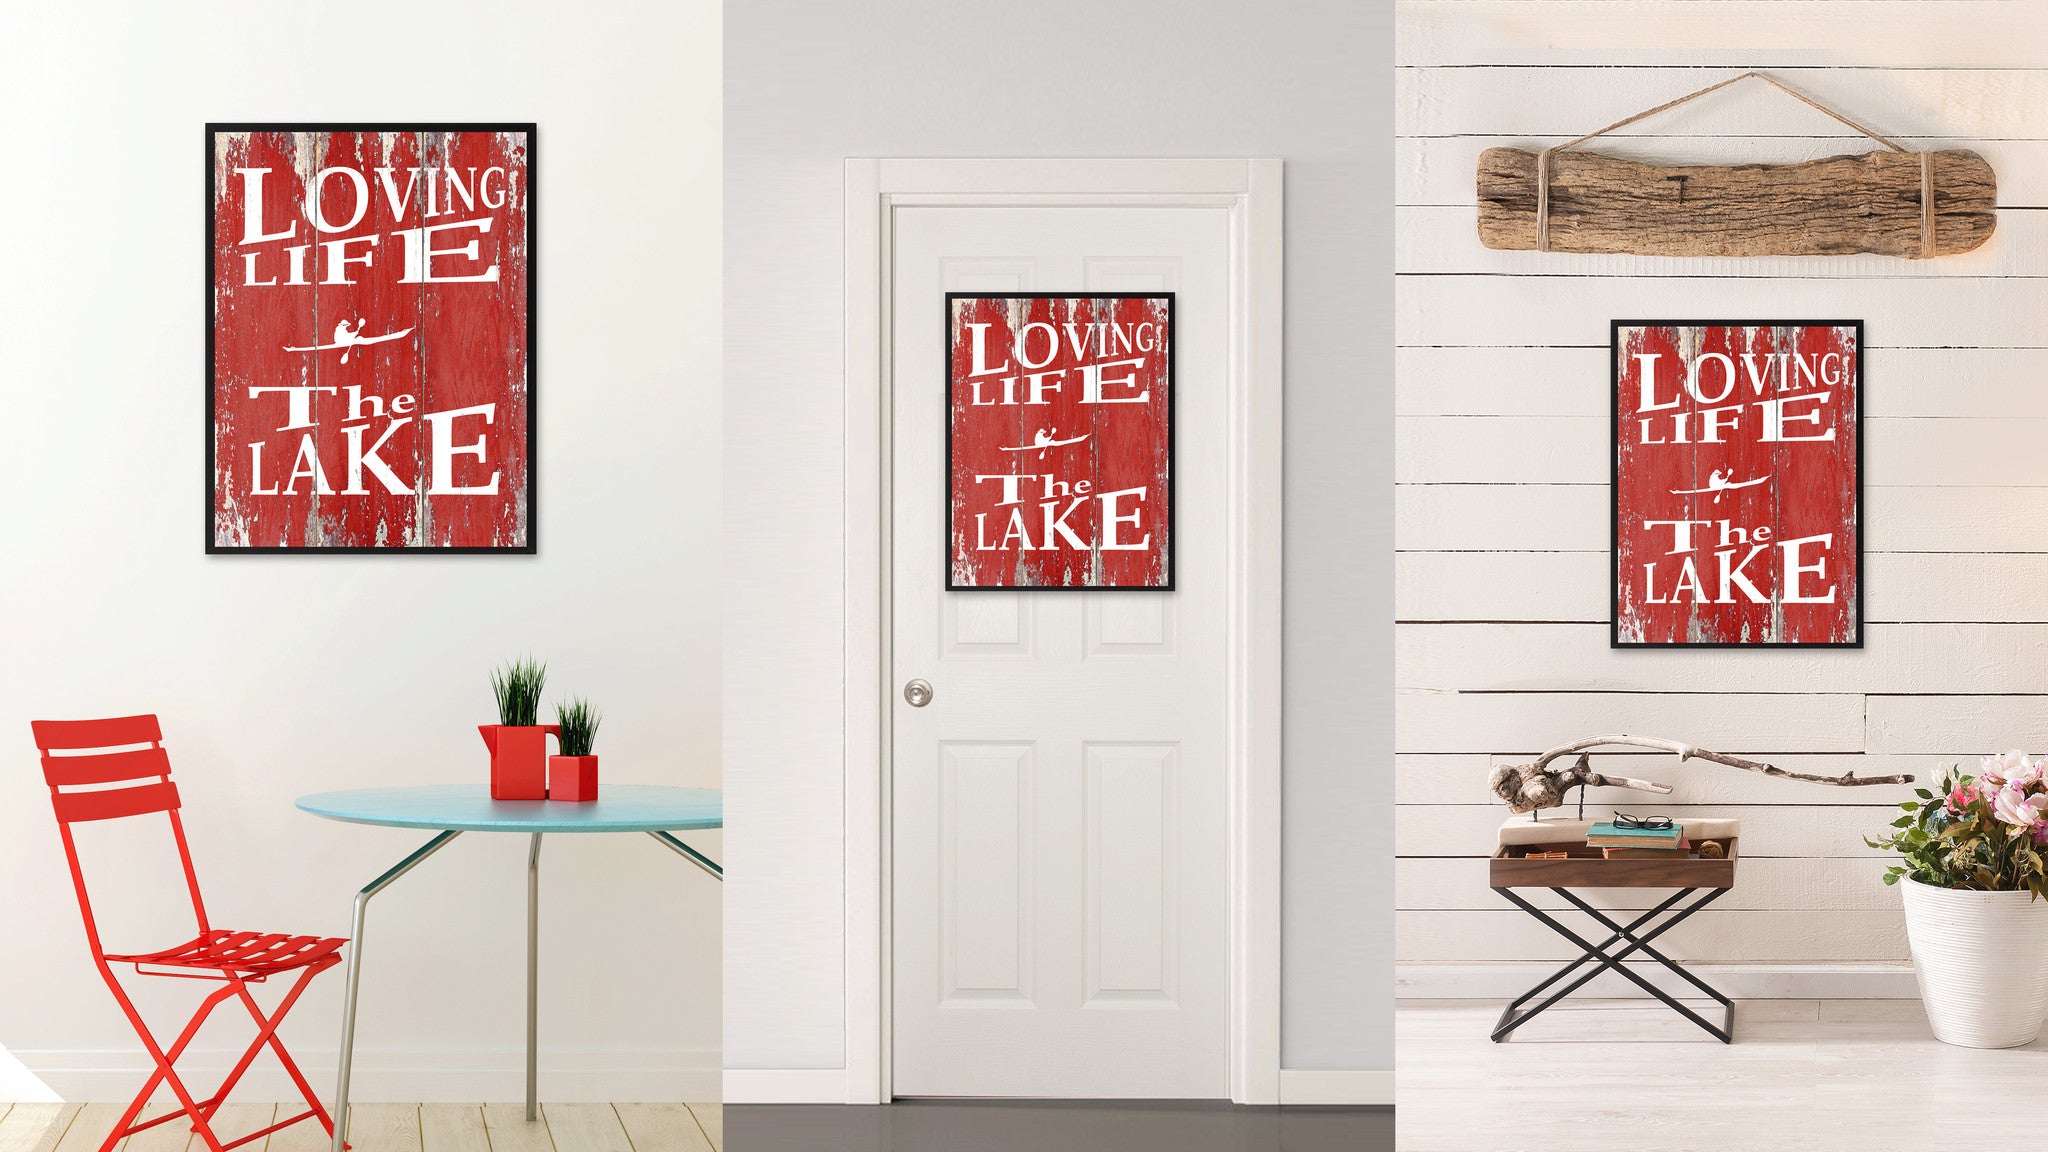 Loving Life The Lake Saying Canvas Print, Black Picture Frame Home Decor Wall Art Gifts